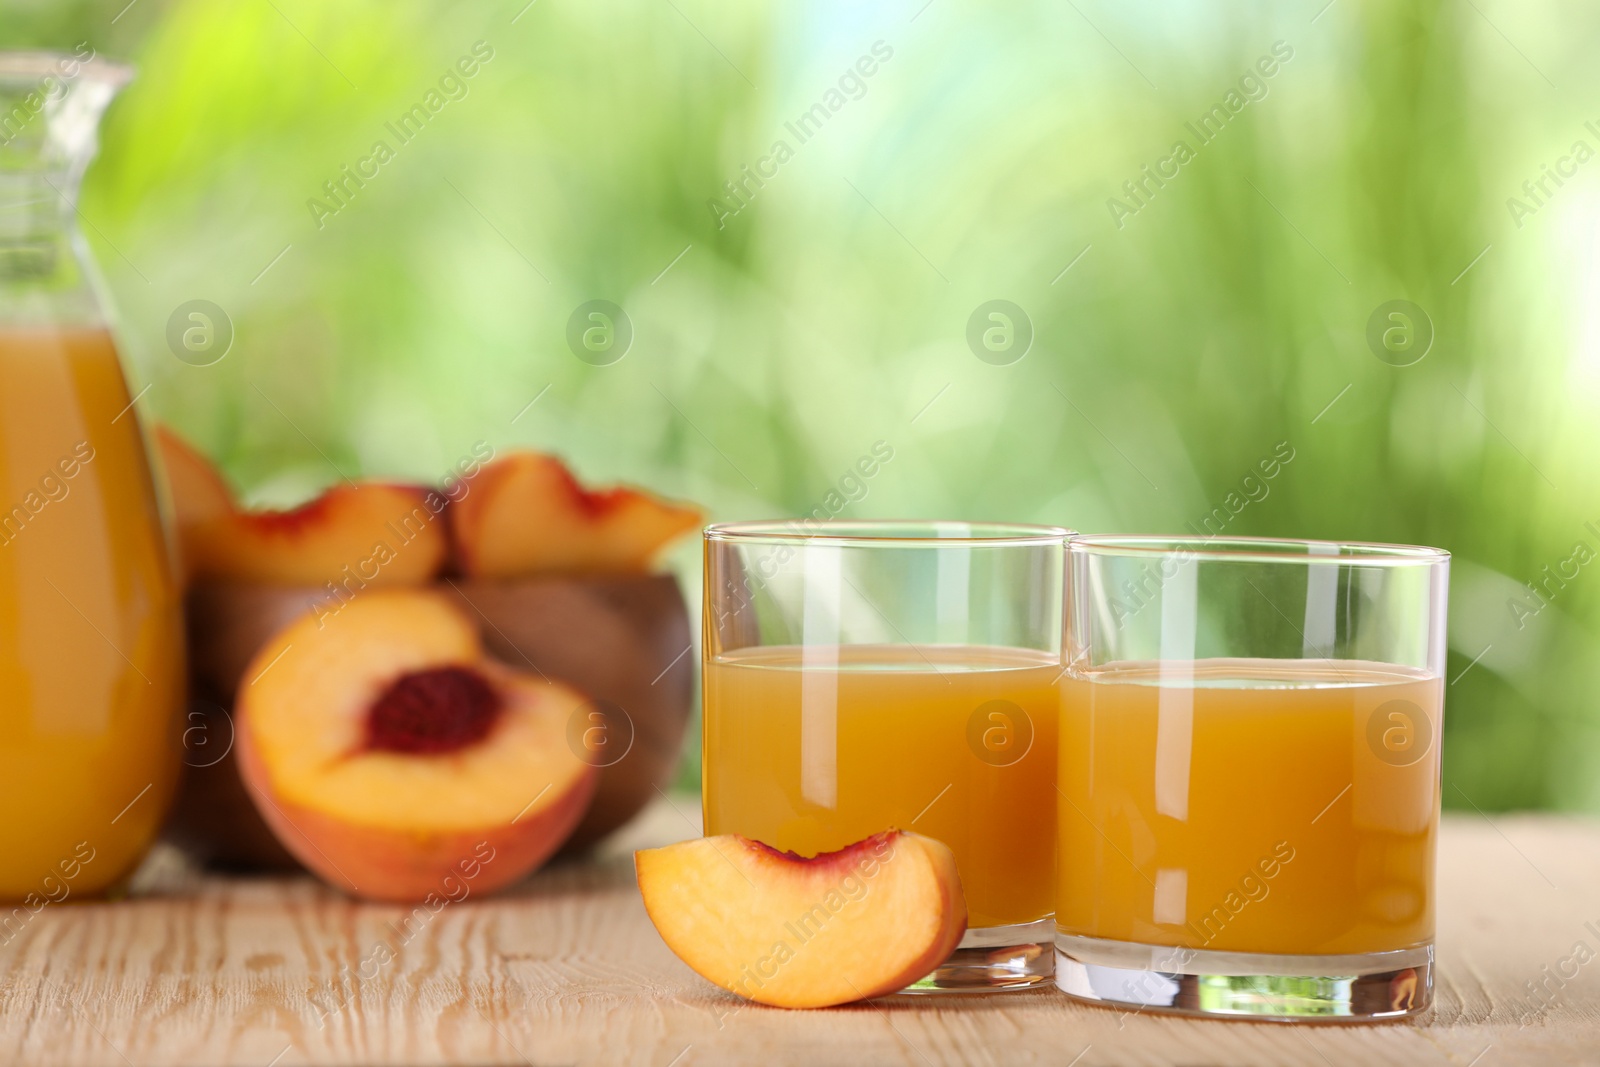 Photo of Tasty peach juice and fresh fruits on wooden table outdoors, space for text